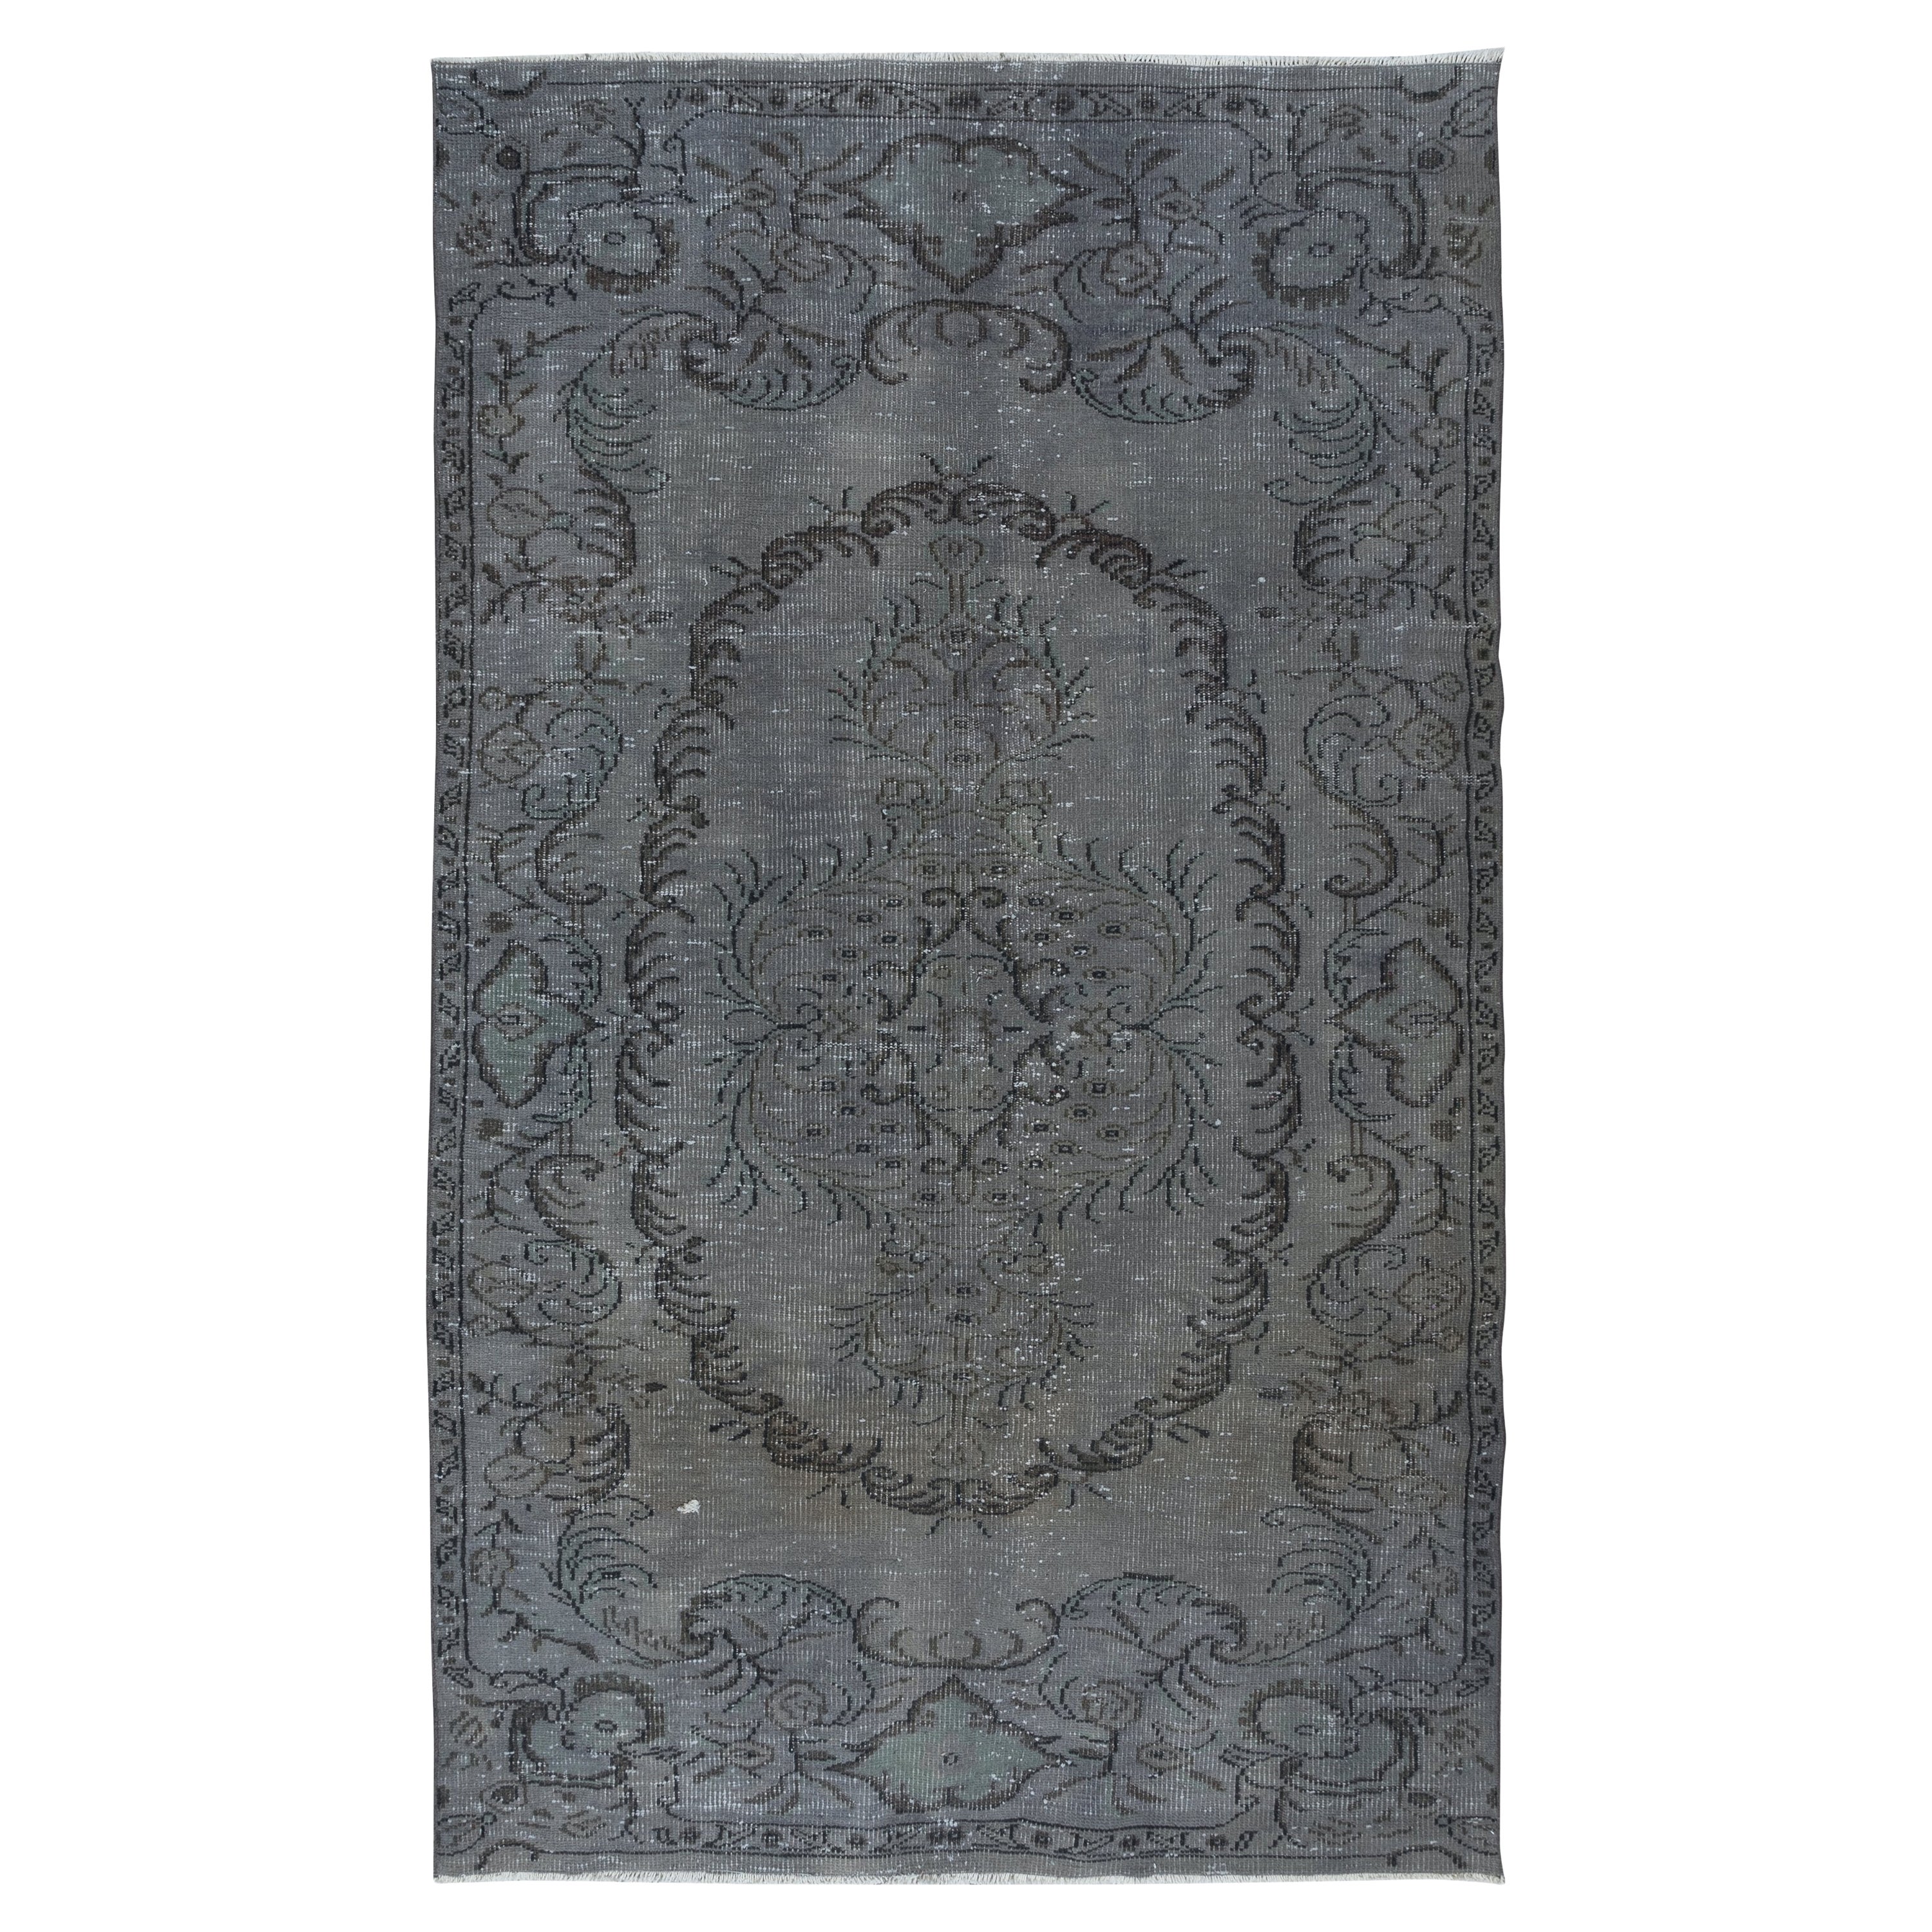 5.2x8.6 Ft Handmade Turkish Rug Over-Dyed in Gray, Vintage Upcycled Carpet For Sale